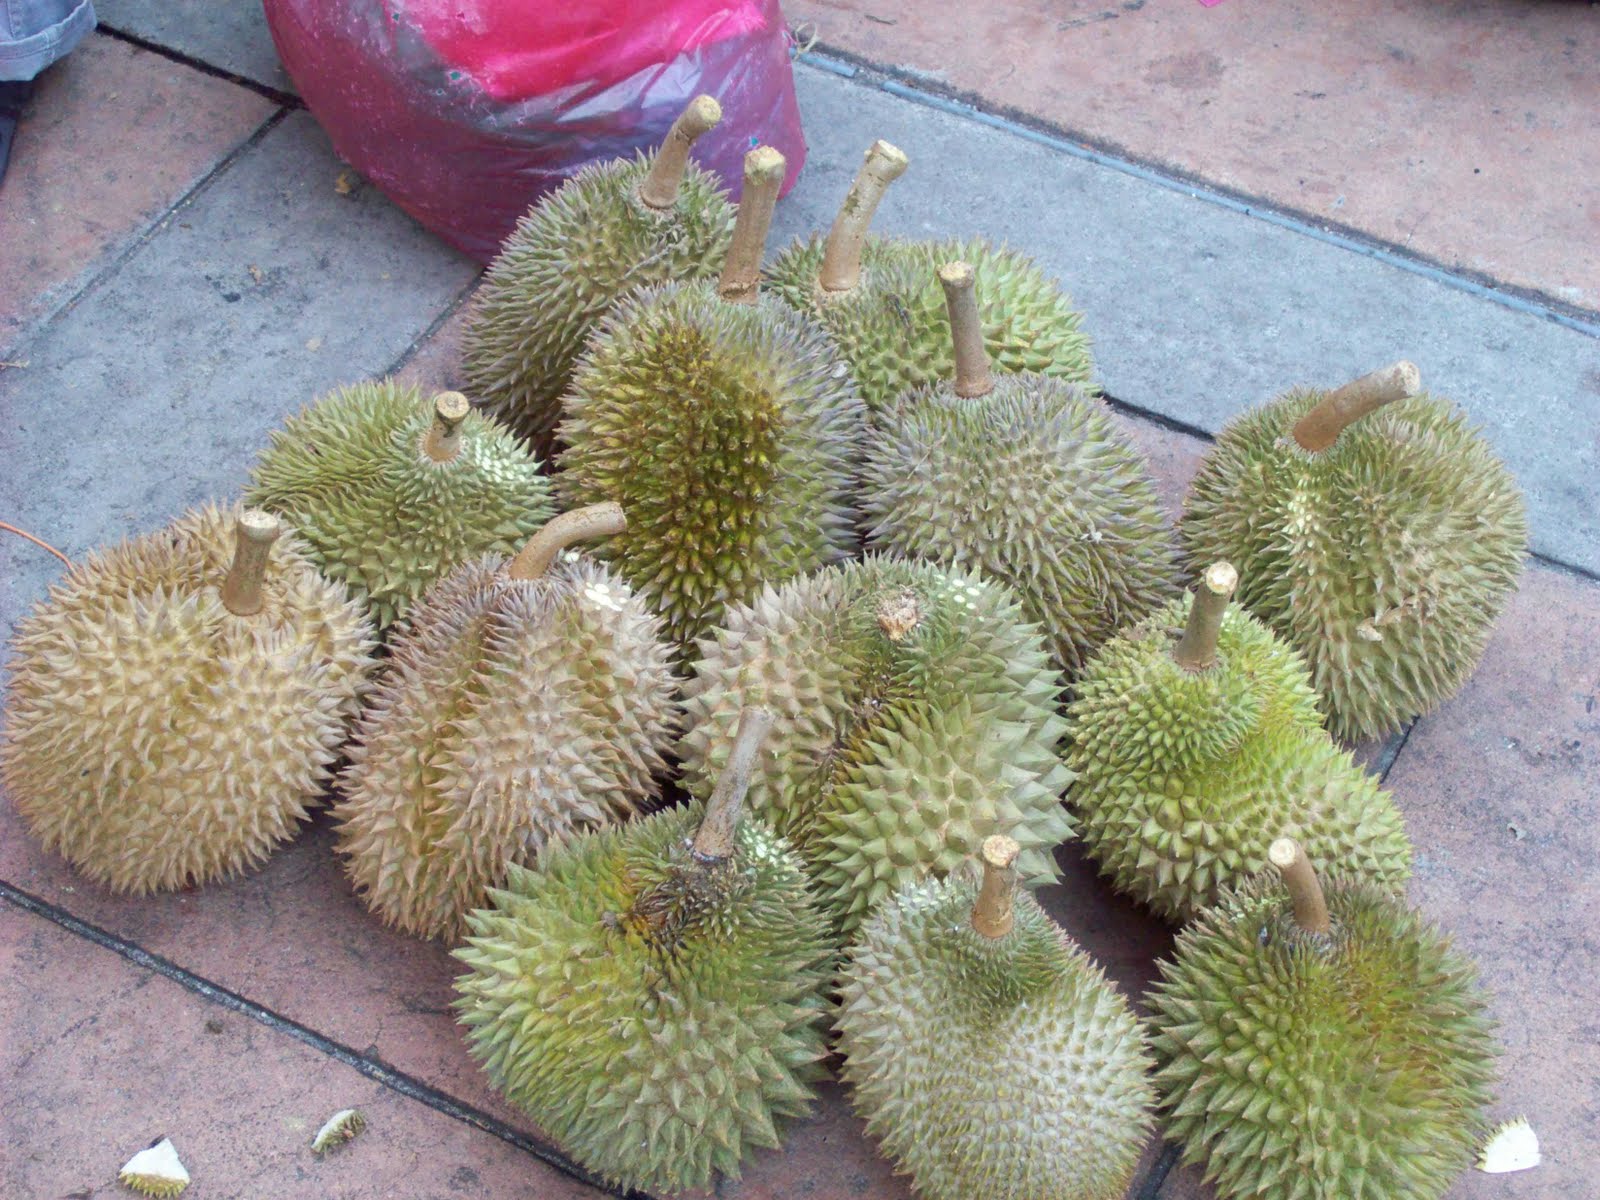 Food Writer’s Diary: I finally understand durian